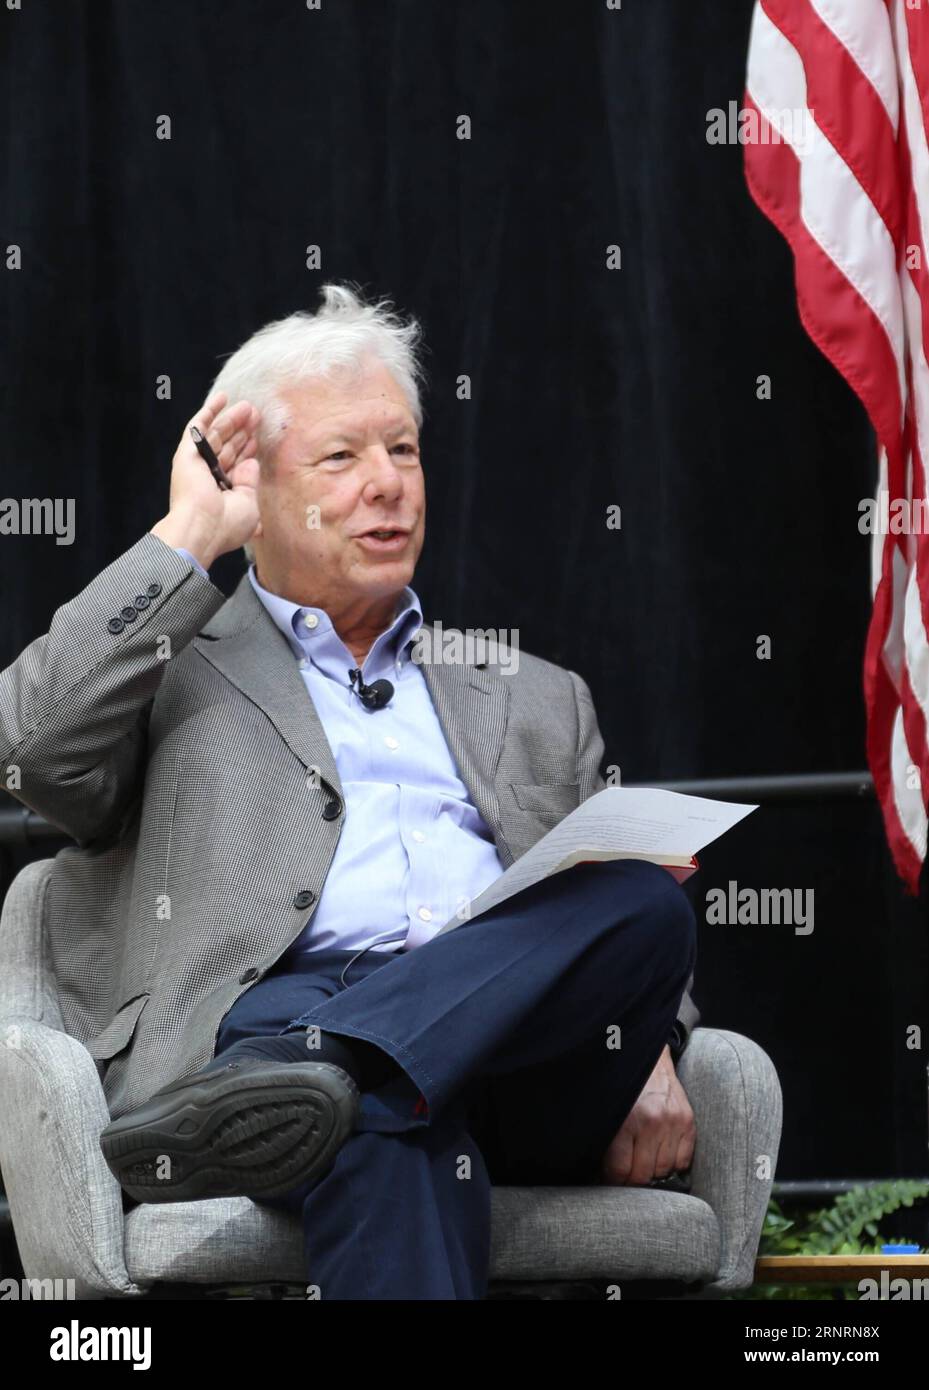 (171009) -- CHICAGO, Oct. 9, 2017 -- Richard H. Thaler, 2017 Nobel Prize winner in Economics, speaks during a press conference at University of Chicago Booth School of Business in Chicago, the United States, on Oct. 9, 2017. The 2017 Nobel Prize in Economics was awarded to Richard H. Thaler for his contributions to behavioural economics, announced the Royal Swedish Academy of Sciences on Monday. ) U.S.-CHICAGO-NOBEL PRIZE IN ECONOMICS-RICHARD H. THALER-PRESS CONFERENCE WangxQiang PUBLICATIONxNOTxINxCHN Stock Photo